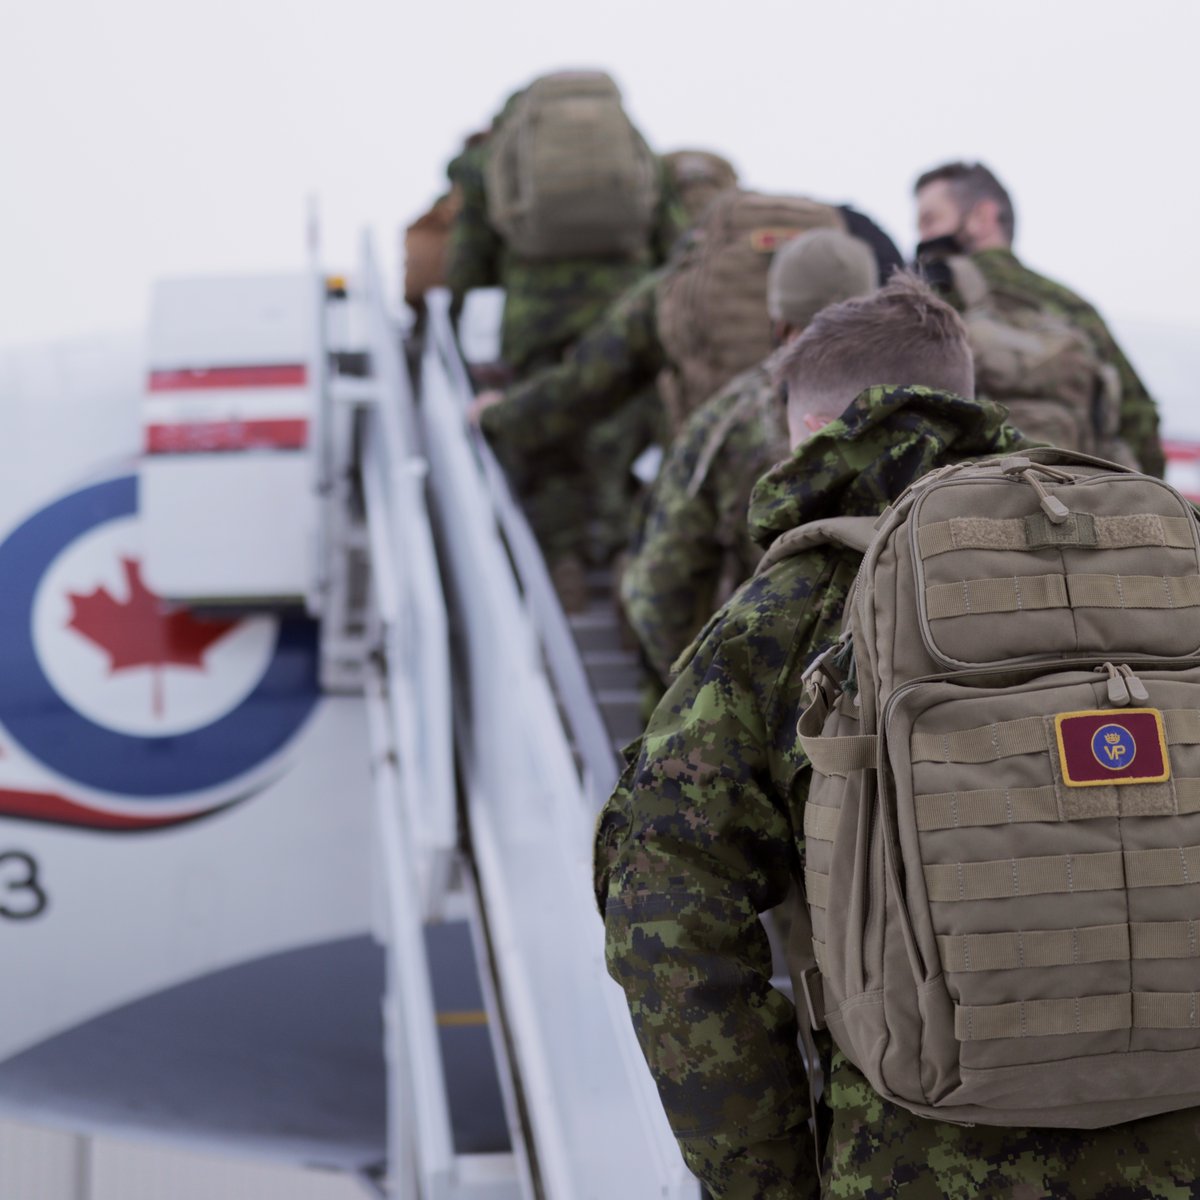 This morning, soldiers from @3CdnDiv3DivCA departed Edmonton to provide support to Ukrainian refugees in Poland.   BZ to all for their dedication to human rights and protecting refugees.